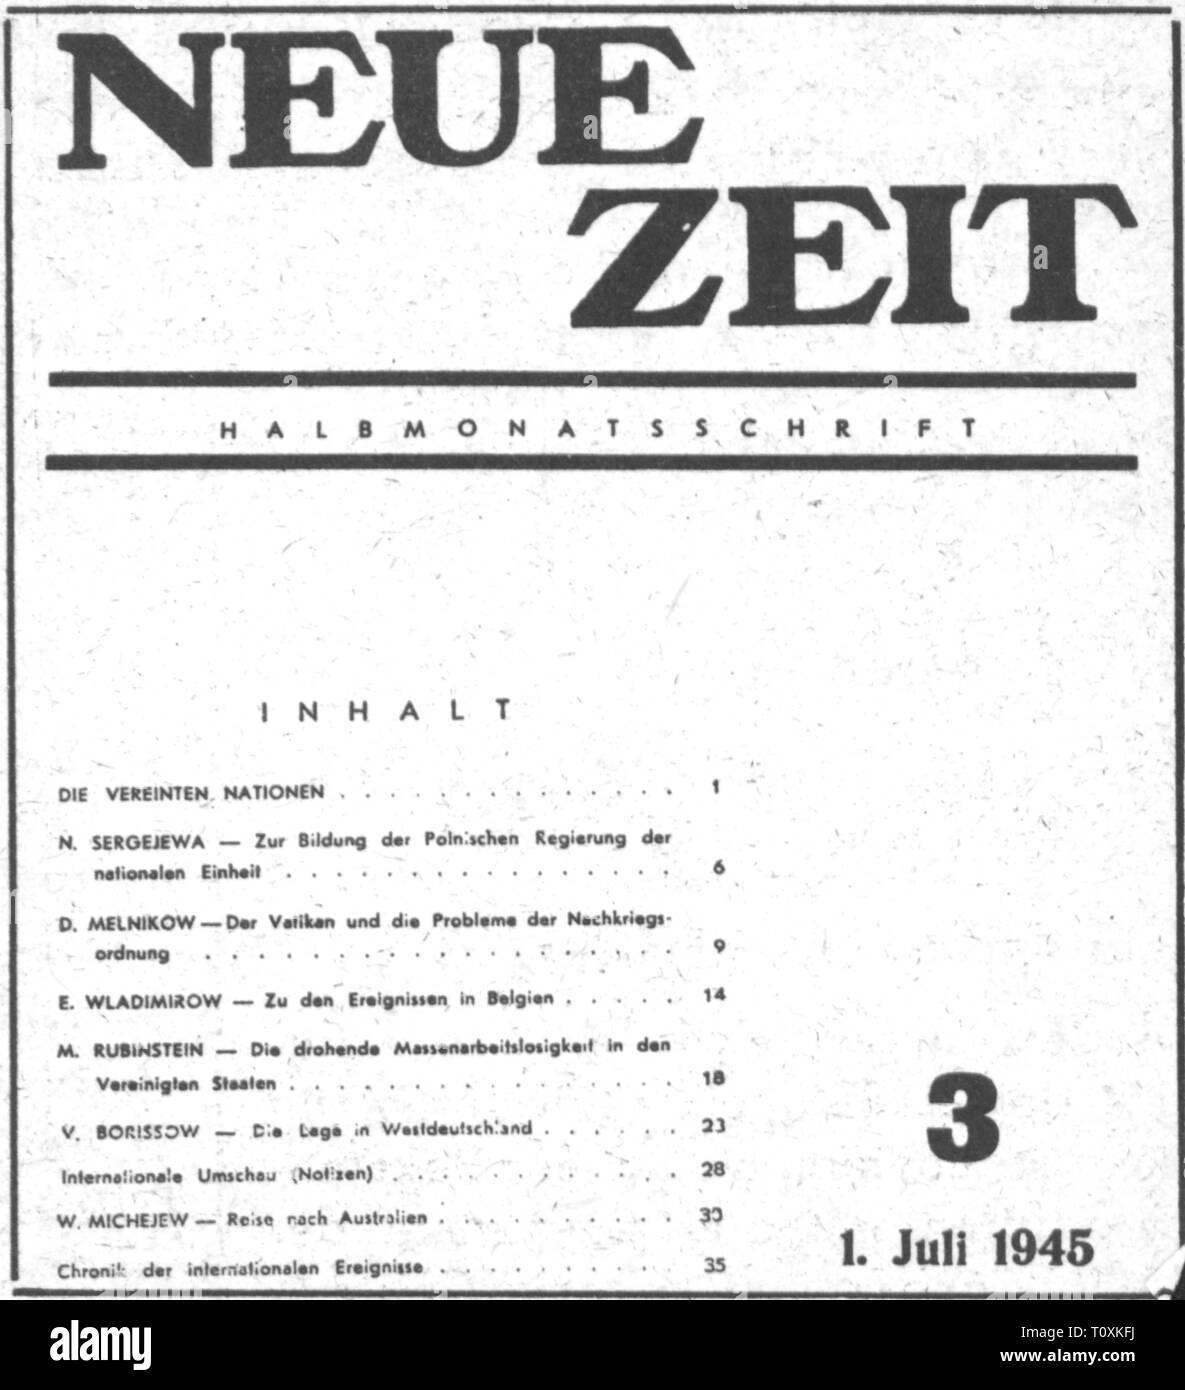 press / media, magazines, 'Neue Zeit' (New Era), front page, number 3, Moscow, 1.7.1945, Soviet Union, graphic, graphics, title, titles, masthead, script, scripts, Second World War / WWII, wars, communism, socialism, propaganda, typo, typeface, type, typefaces, fonts, types, font, end of the war, war's end, post war period, post-war period, post-war years, post-war era, occupying power, occupying powers, occupation, occupations, 20th century, 1940s, press, presses, number, numbers, Moscow, Moskva, historic, historical, Additional-Rights-Clearance-Info-Not-Available Stock Photo